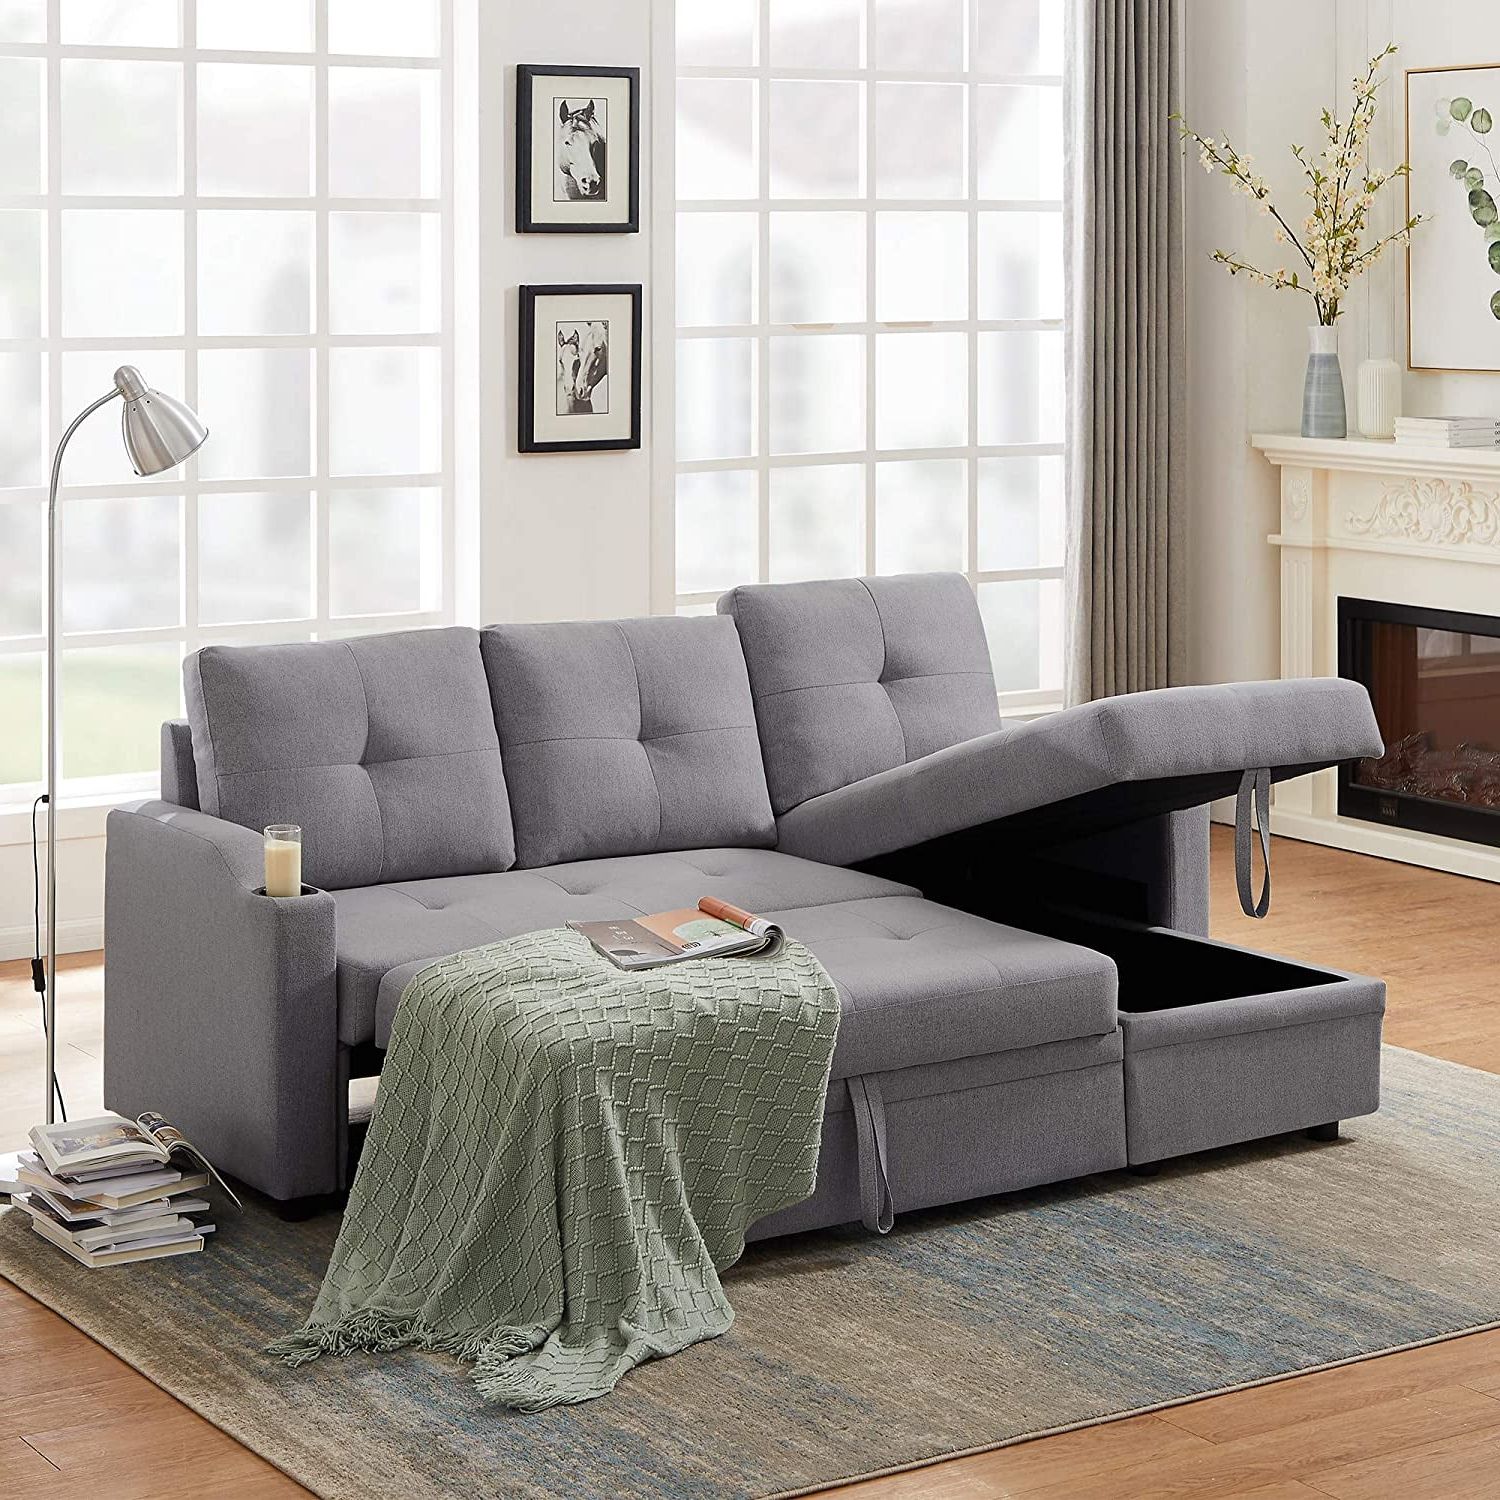 Best And Most Comfortable Sofas With Storage 2022 | Popsugar Home For Sofa Sectionals With Storage (View 9 of 20)